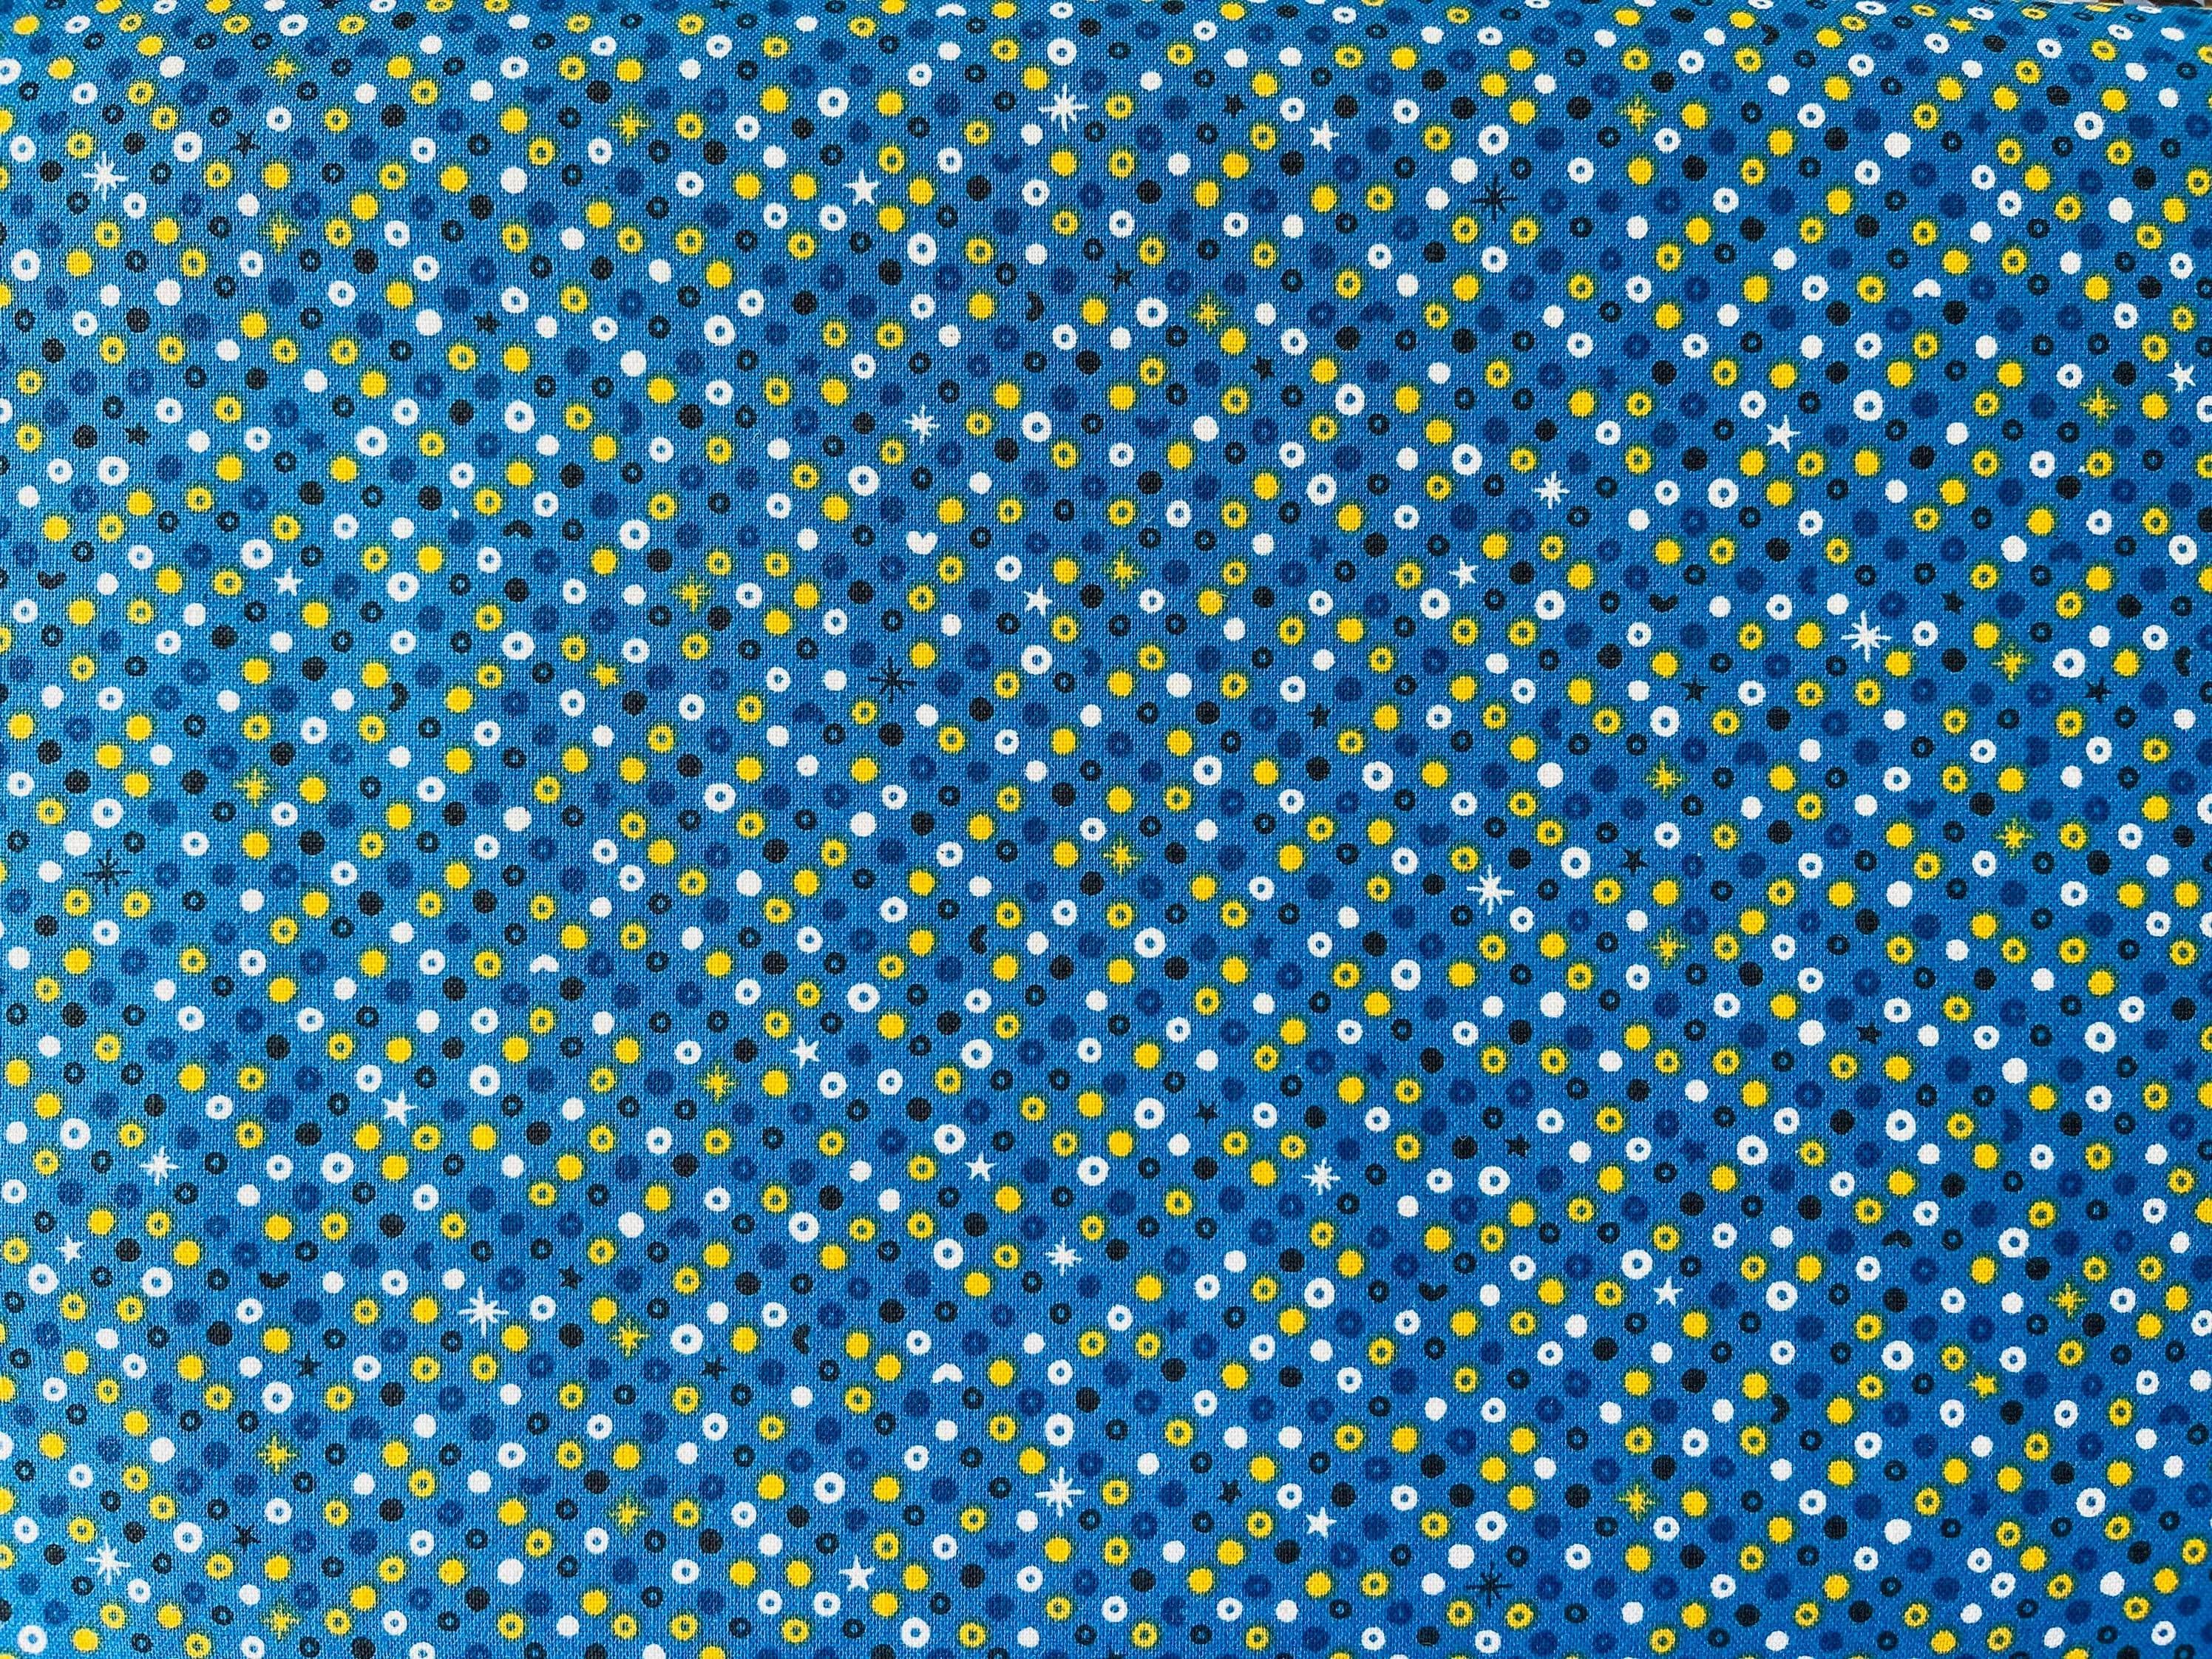 Waku Waku Christmas - Blue Sequins Unbleached Fabric  - Blue - White  - Yellow - Cotton+ Steel - Quilting Cotton Fabric - NM204-BL3U